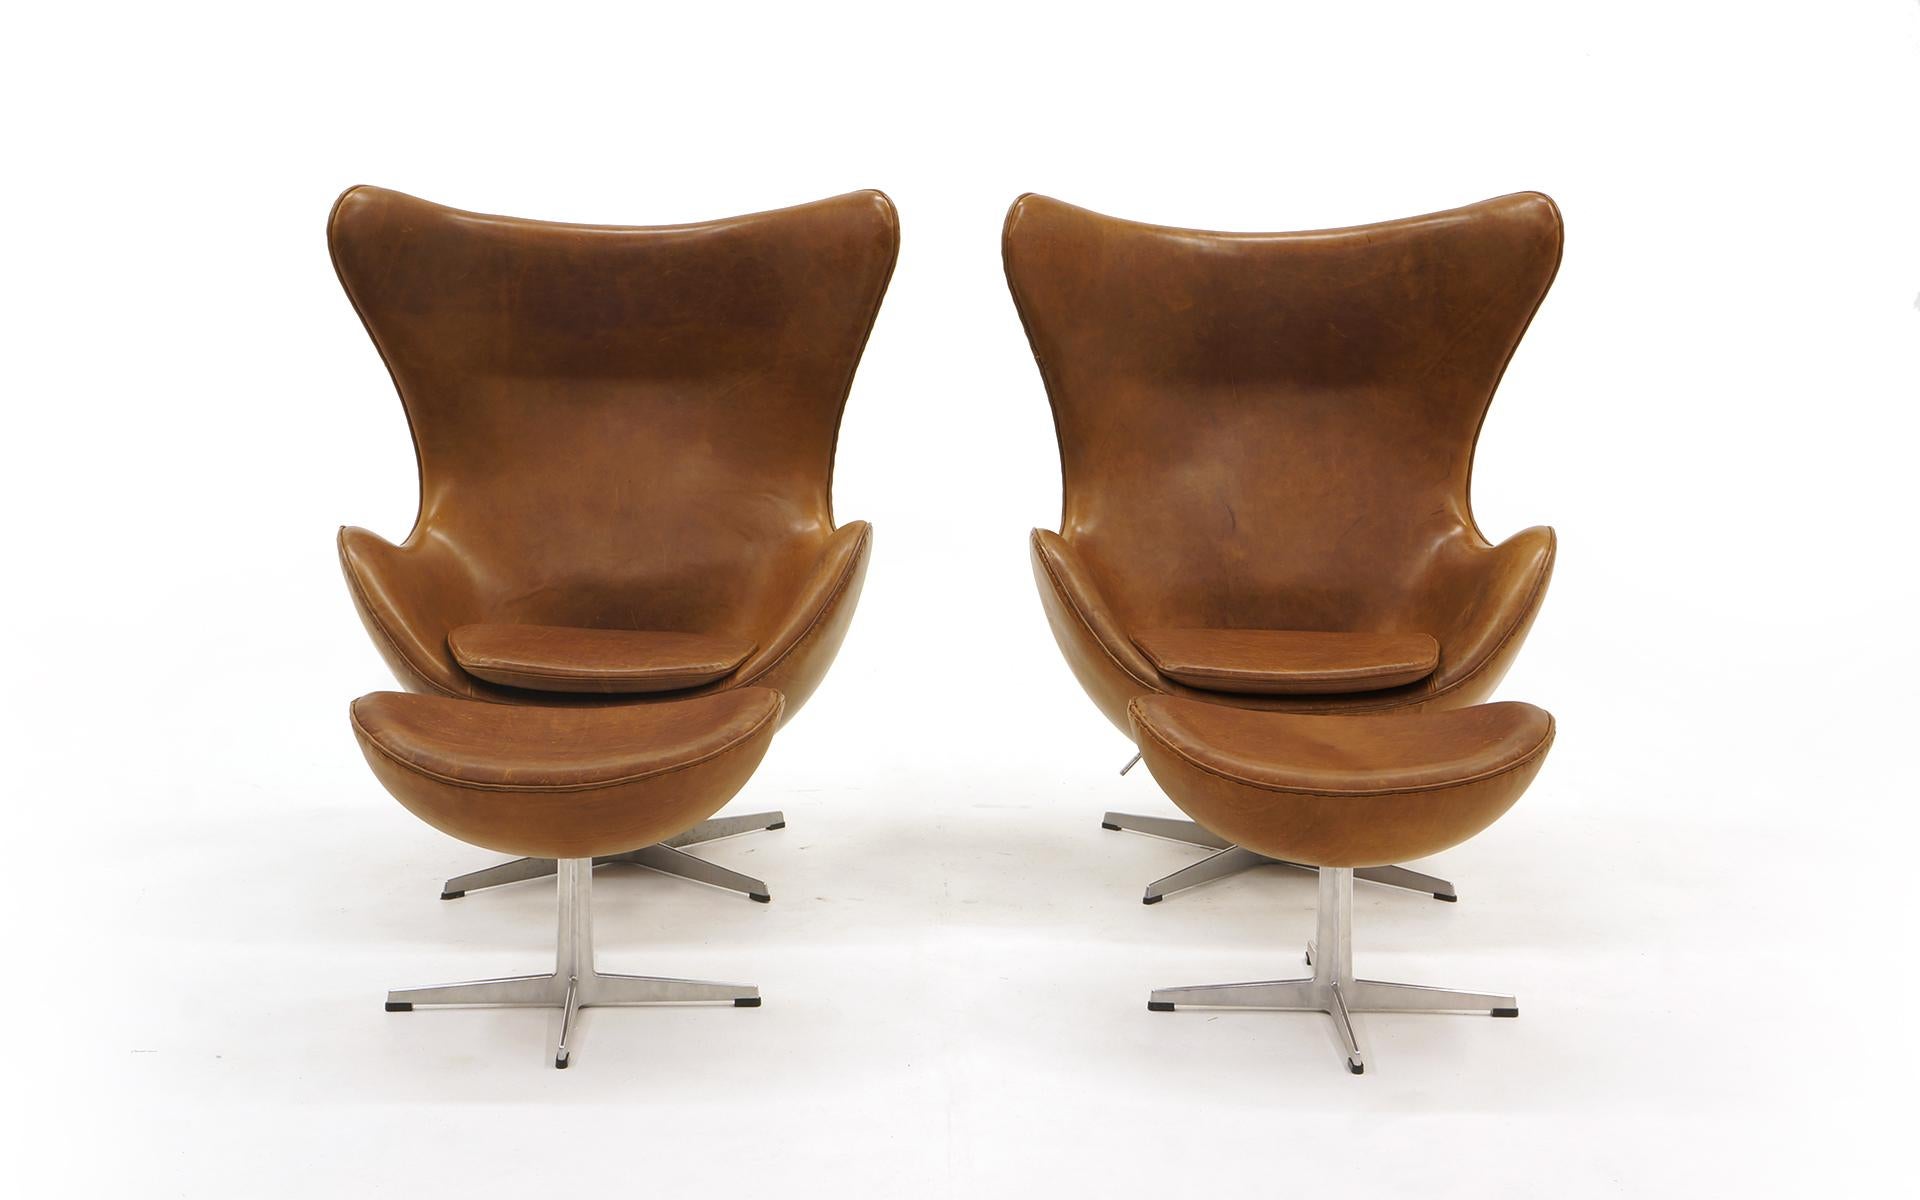 Pair of swivel tilt egg chairs and ottomans designed by Arne Jacobsen and manufactured by Fritz Hansen, Denmark. Jacobsen's modern take on the wingback lounge chair. The tilt mechanism is adjustable. The set is from the early 2000s and have been